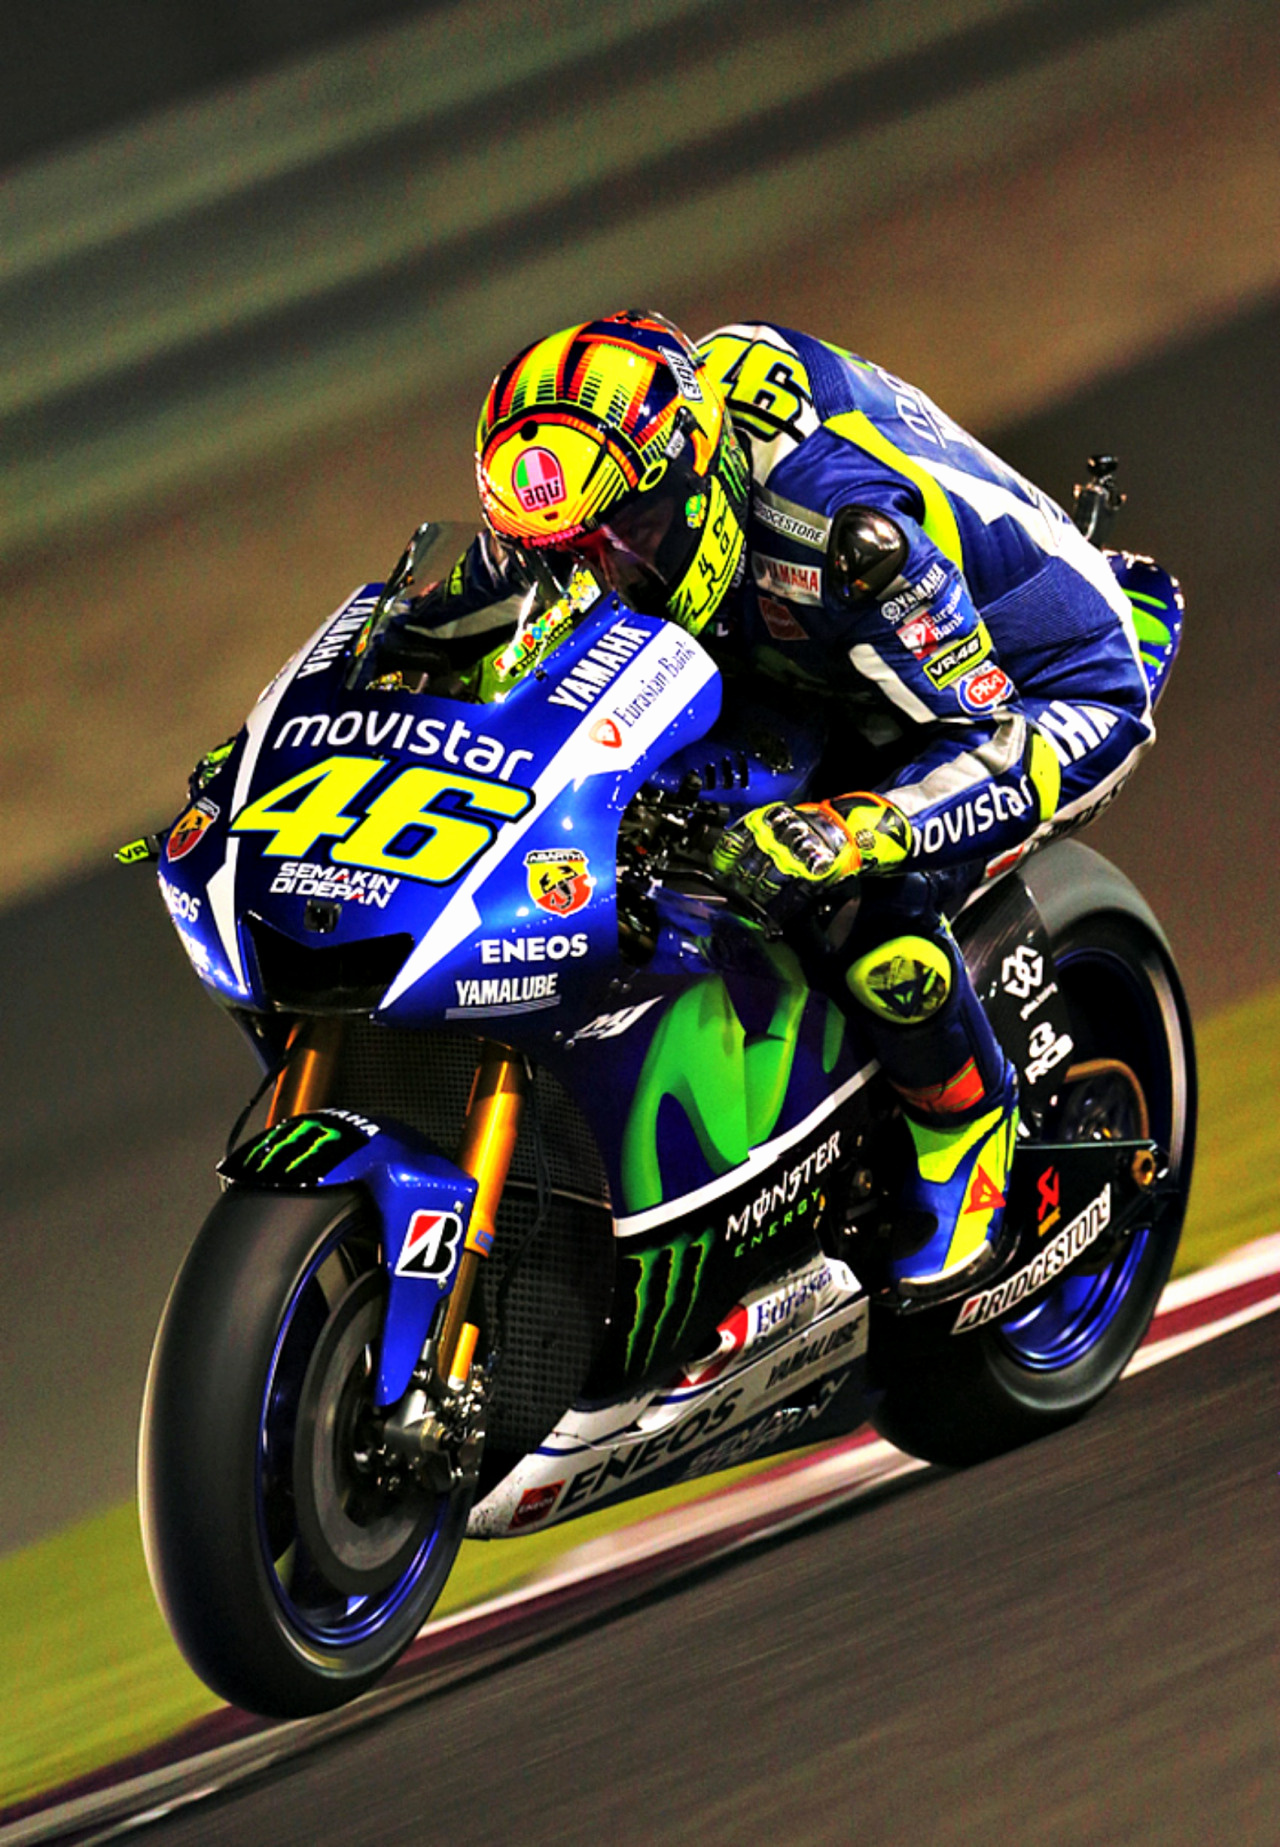 Valentino Rossi Hd Wallpapers 4k Anime - IMAGESEE